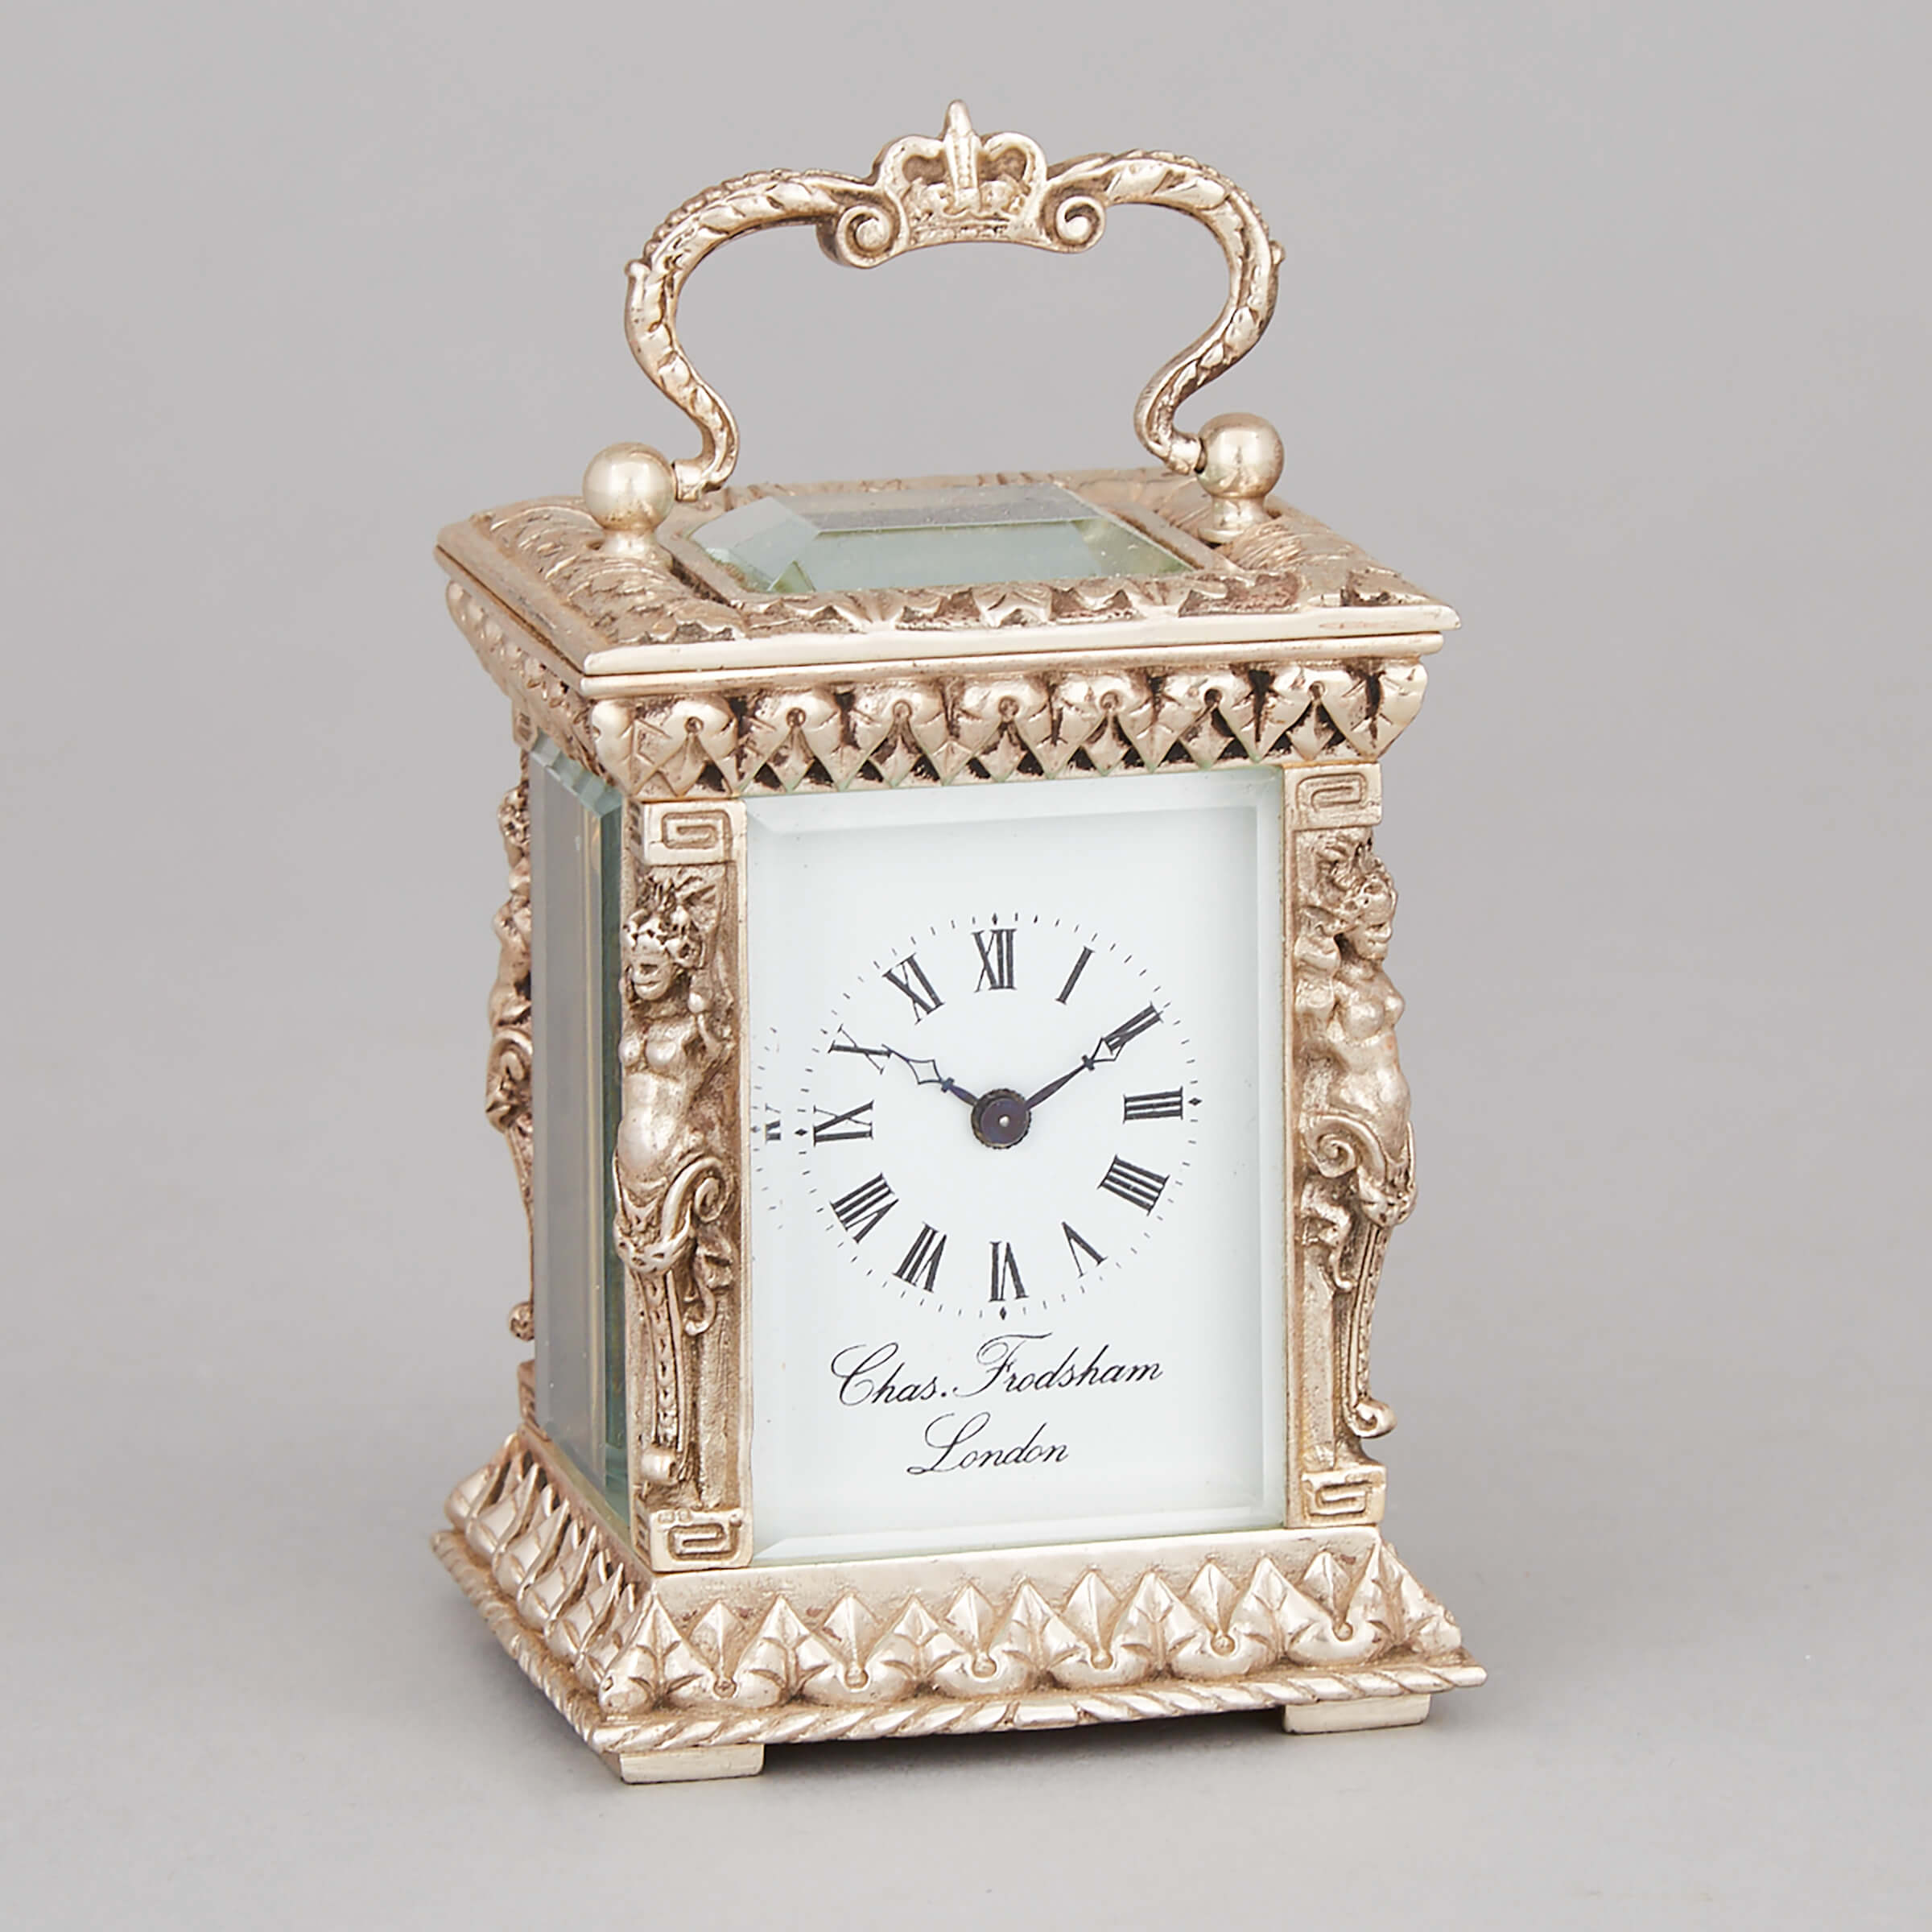 English Silver Miniature Carriage Clock by John Mercer for Charles Frodsham, 1977